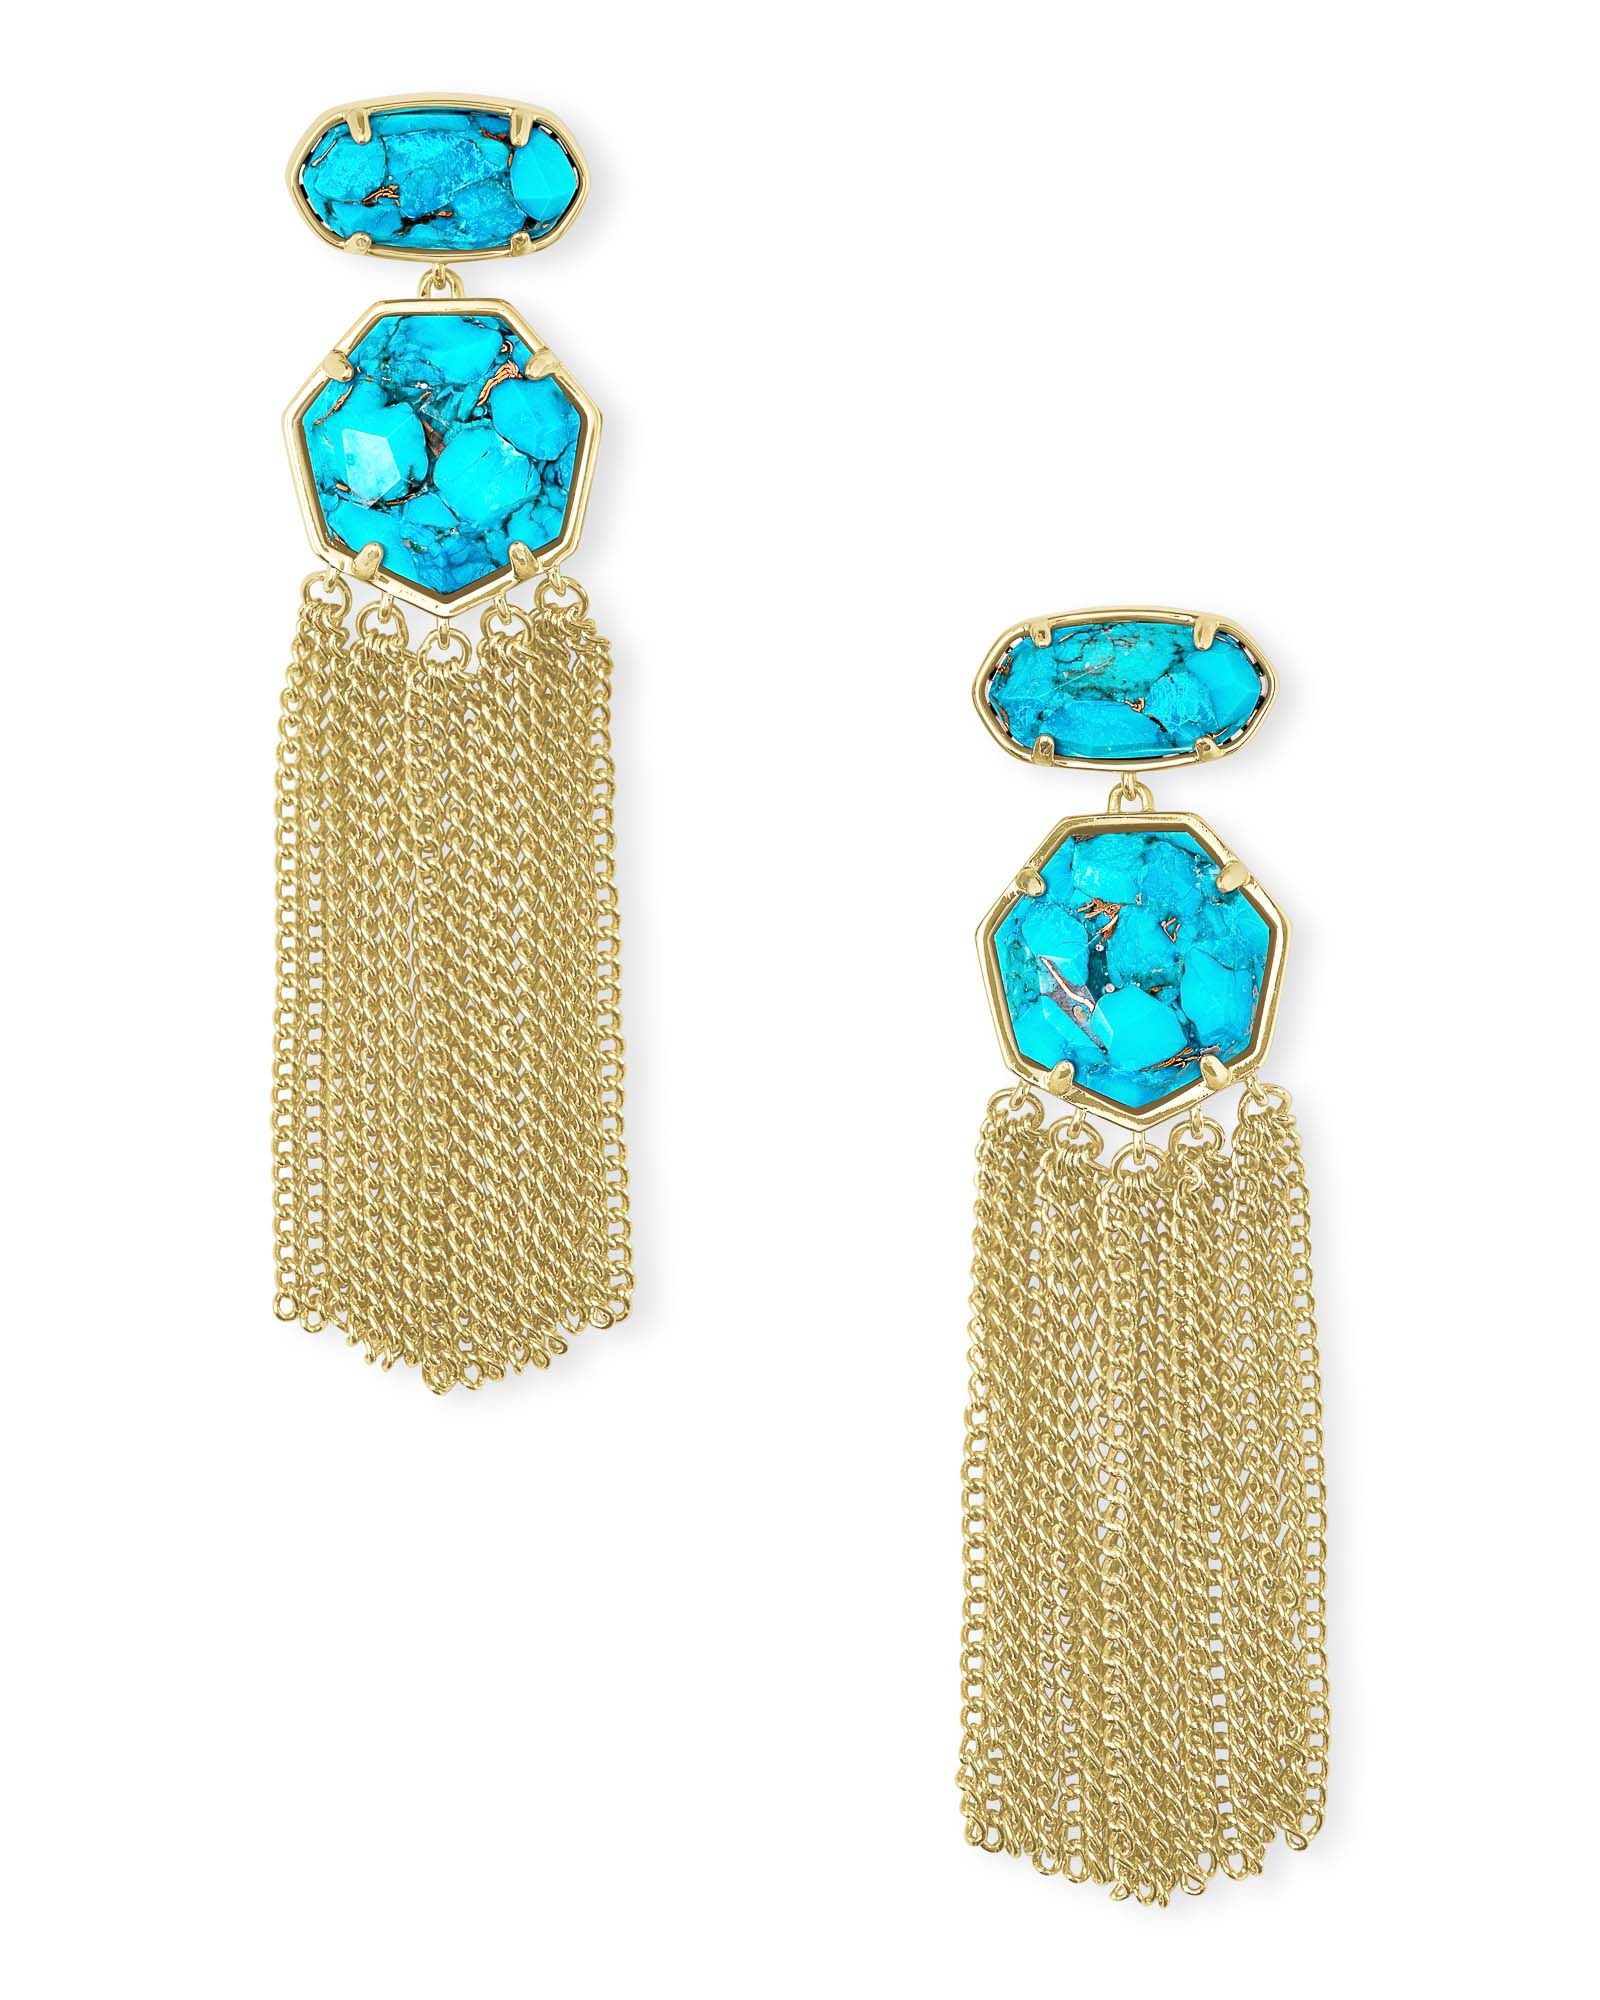 Tae Gold Statement Earrings in Bronze Veined Turquoise Magnesite | Kendra Scott